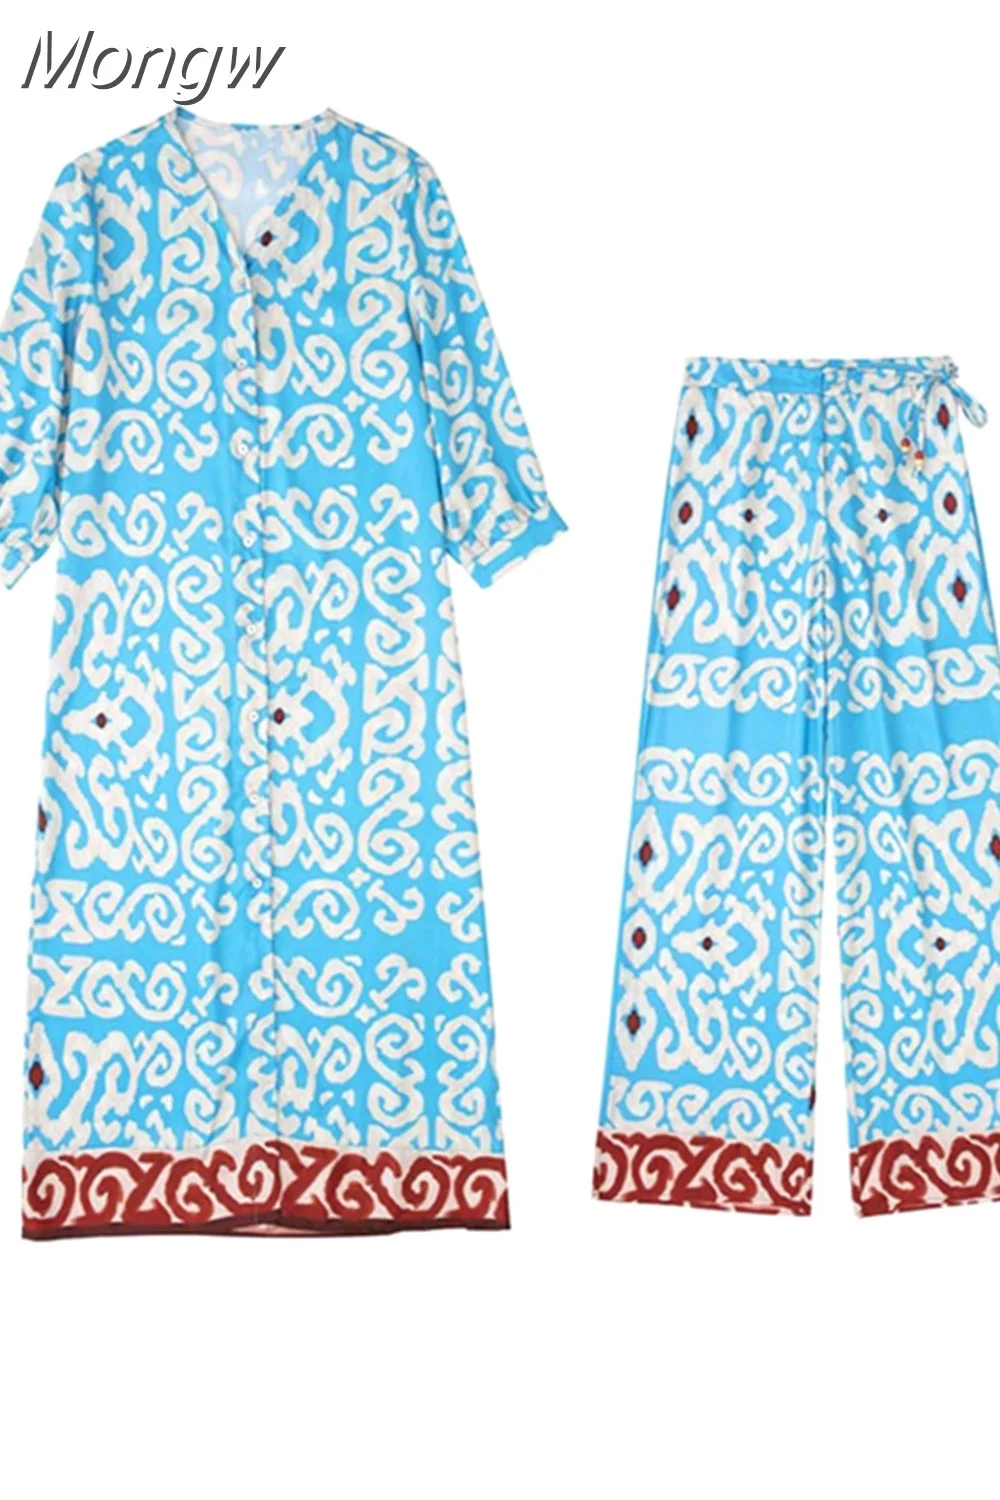 Mongw Lady Casual Set 2023 Female Vintage Temperament V-neck Printed Tunic Midi Dress+belted High Waist Straight Wide Leg Pants